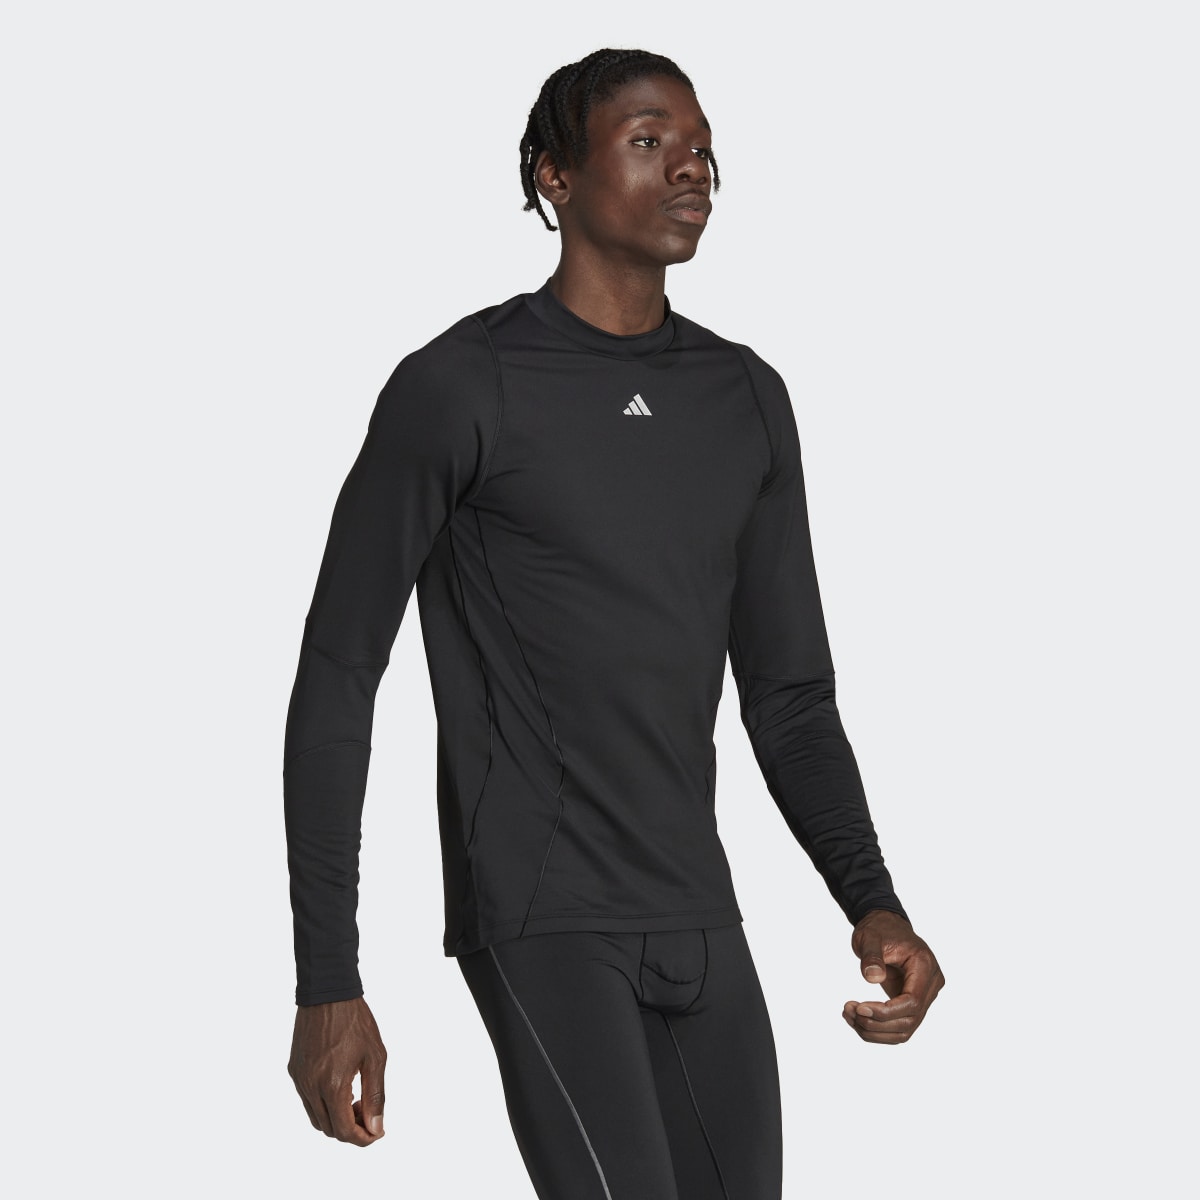 Adidas Techfit COLD.RDY Training Long-Sleeve Top. 4